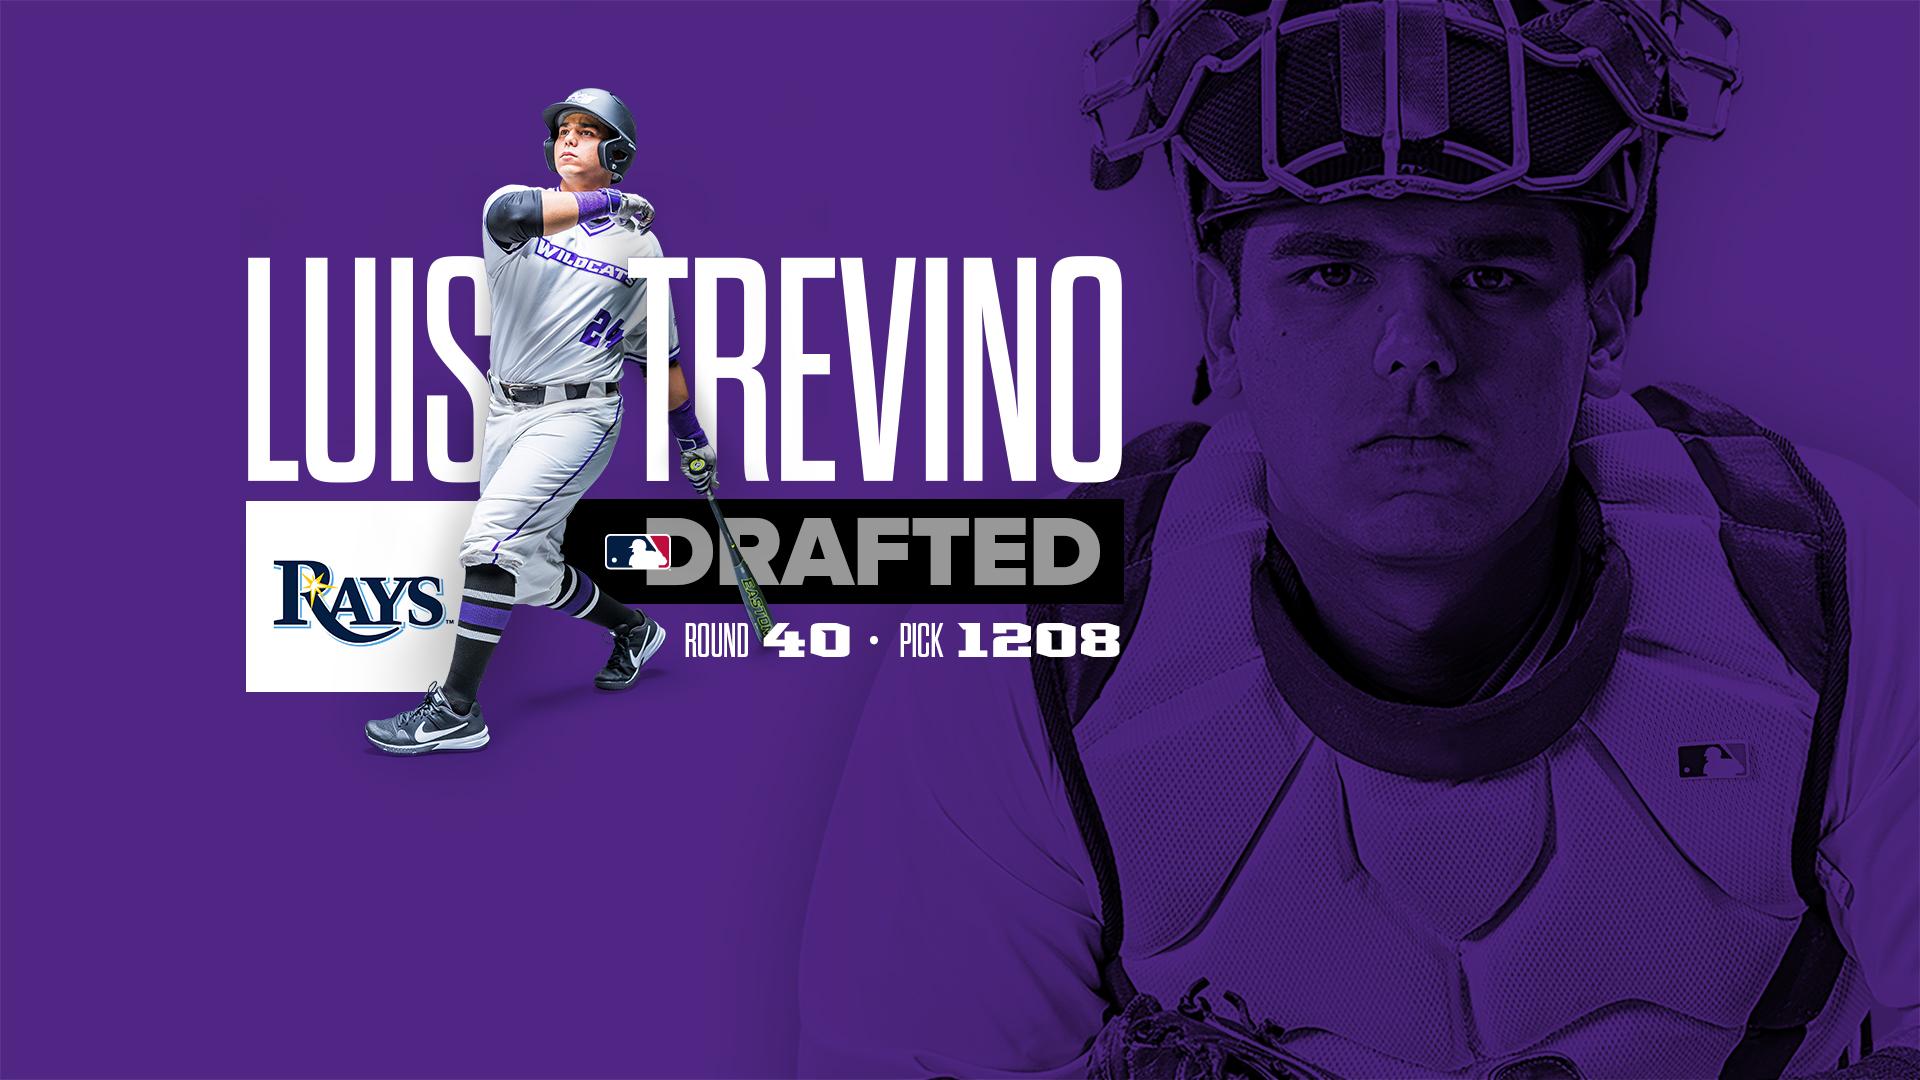 Catcher Luis Trevino drafted by Tampa Bay Rays